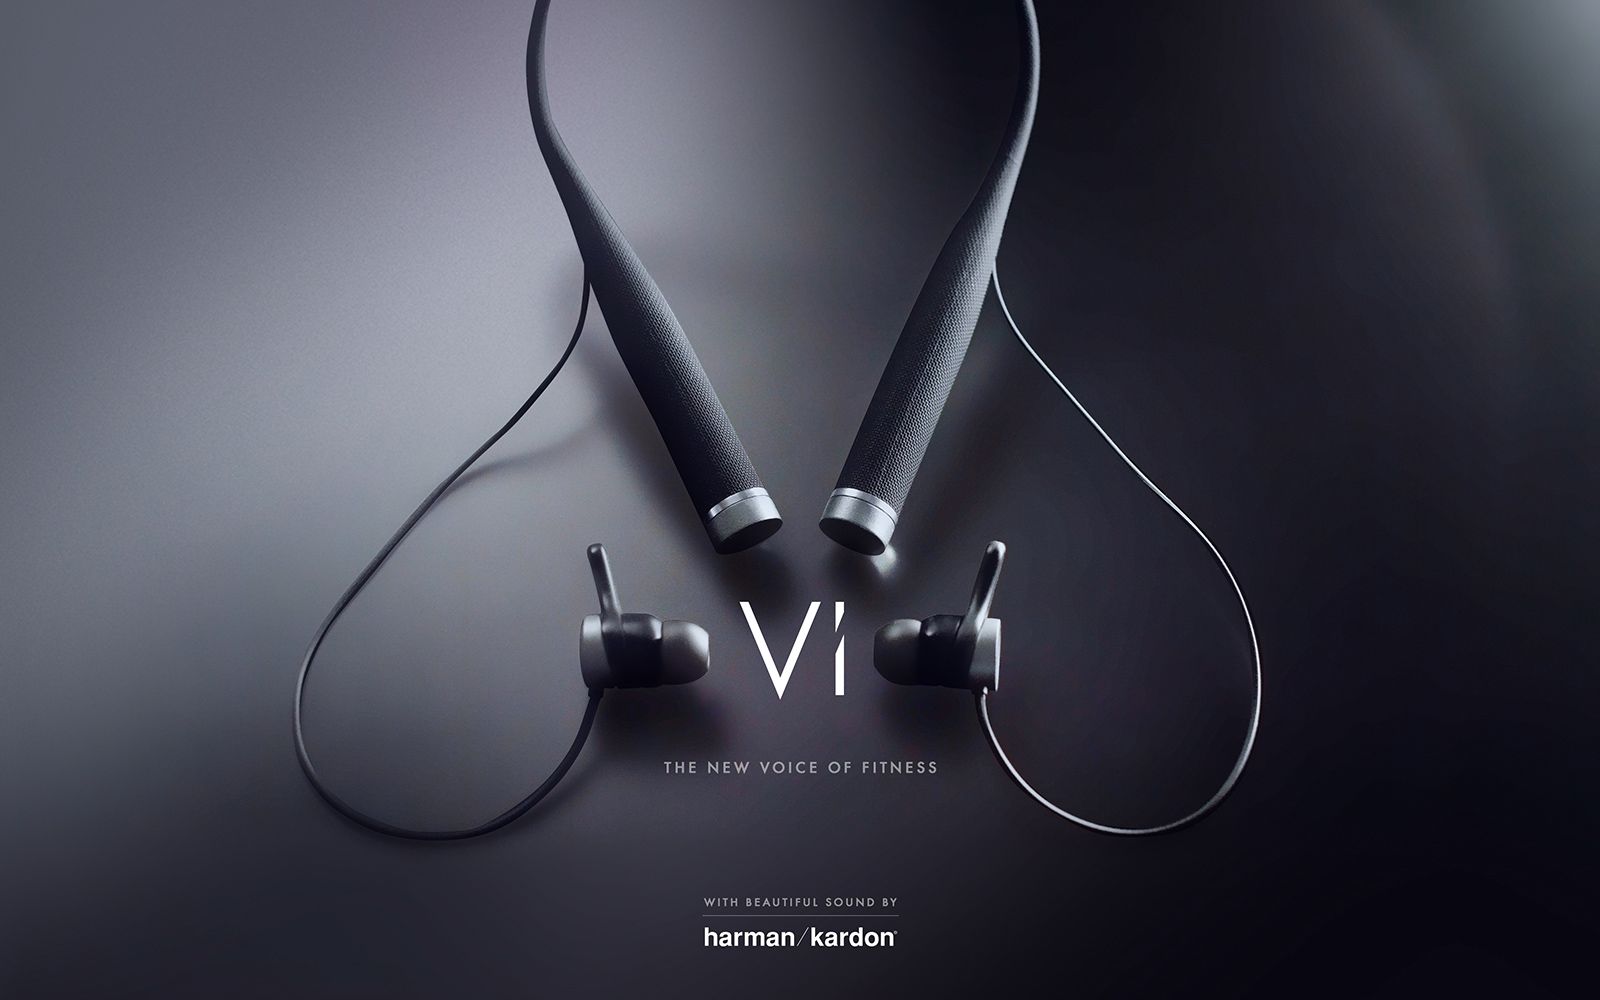 vi is the world’s first ai personal trainer and she’s in harmon kardon hr headphones image 1